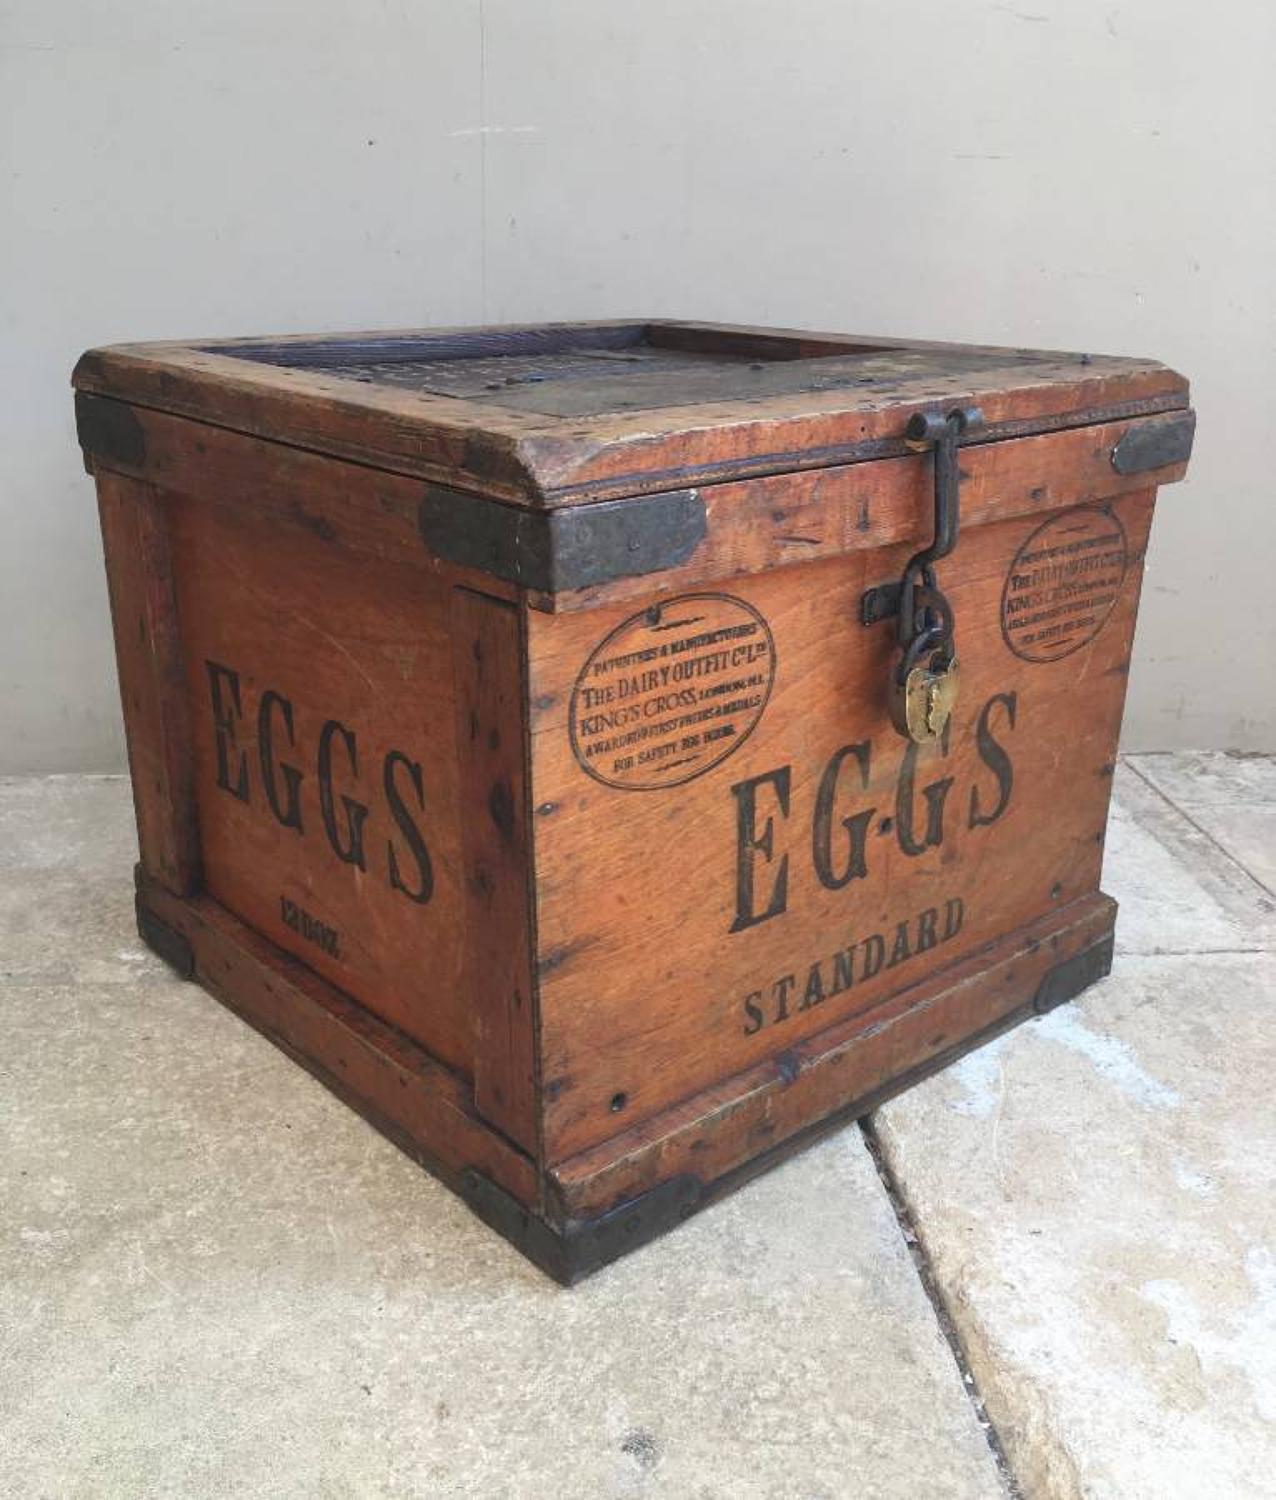 1920s Travelling Eggs Box - The Dairy Outfit Co Ltd